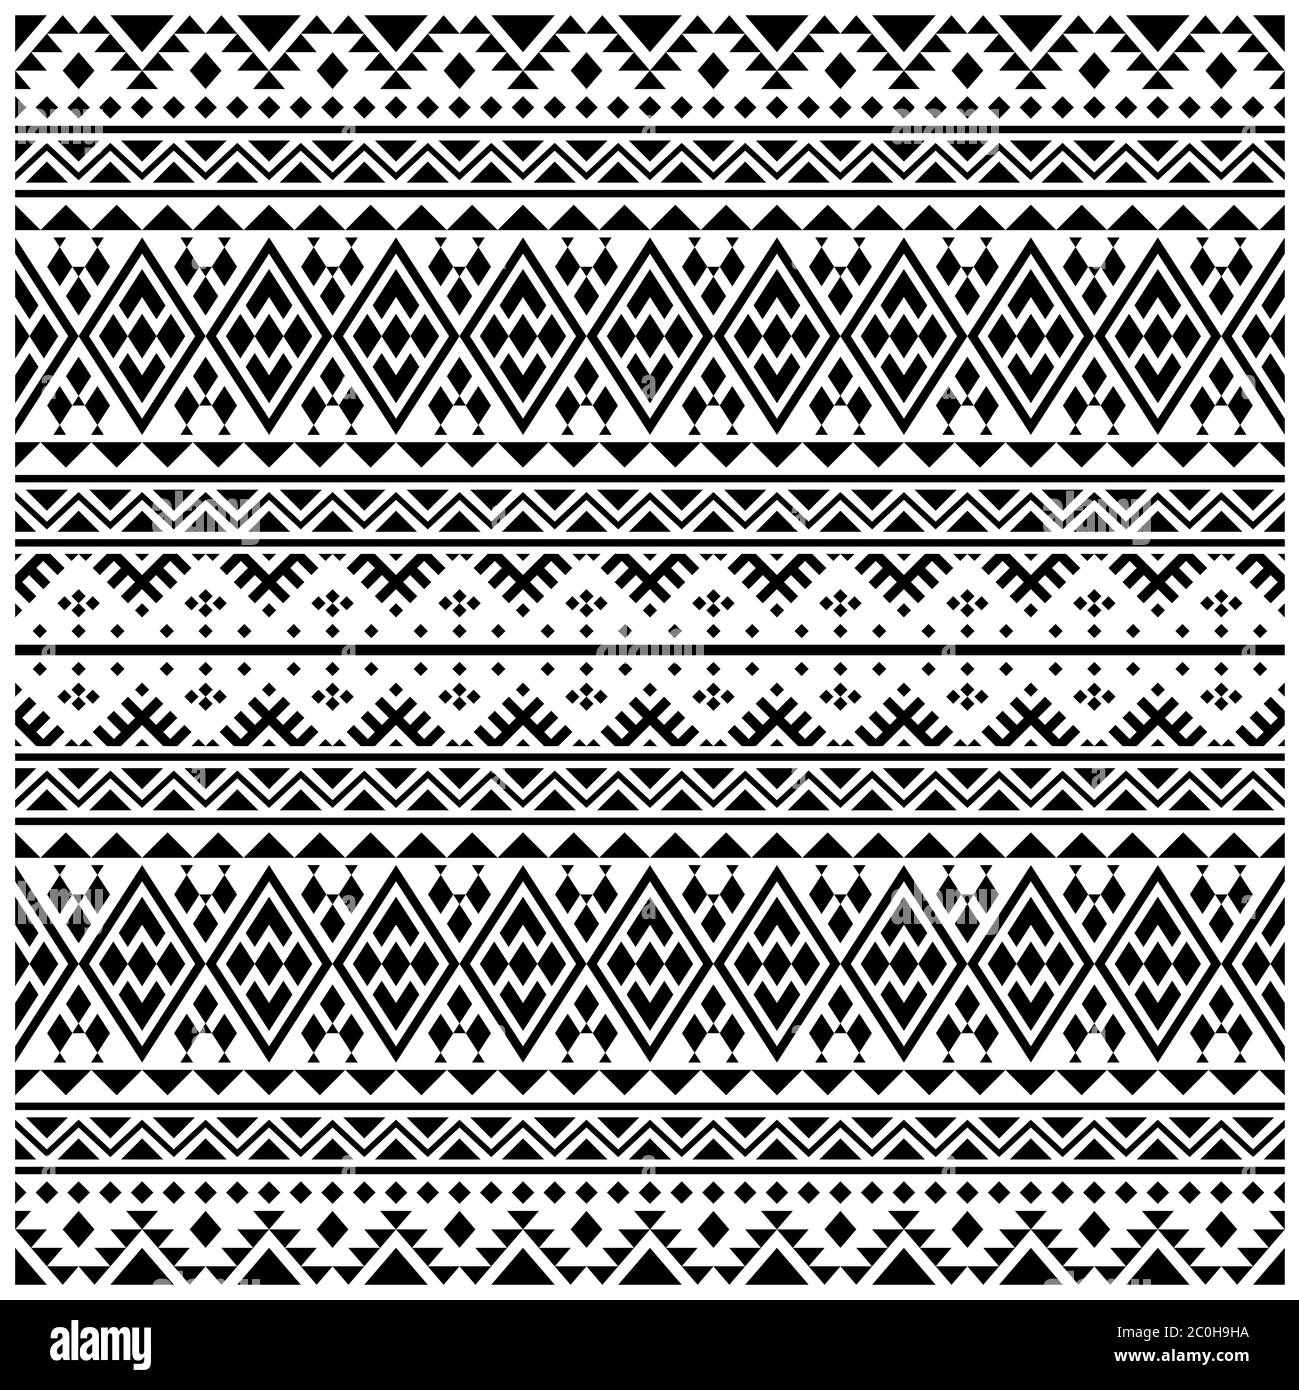 abstract seamless patchwork pattern from black white color ethnic ...